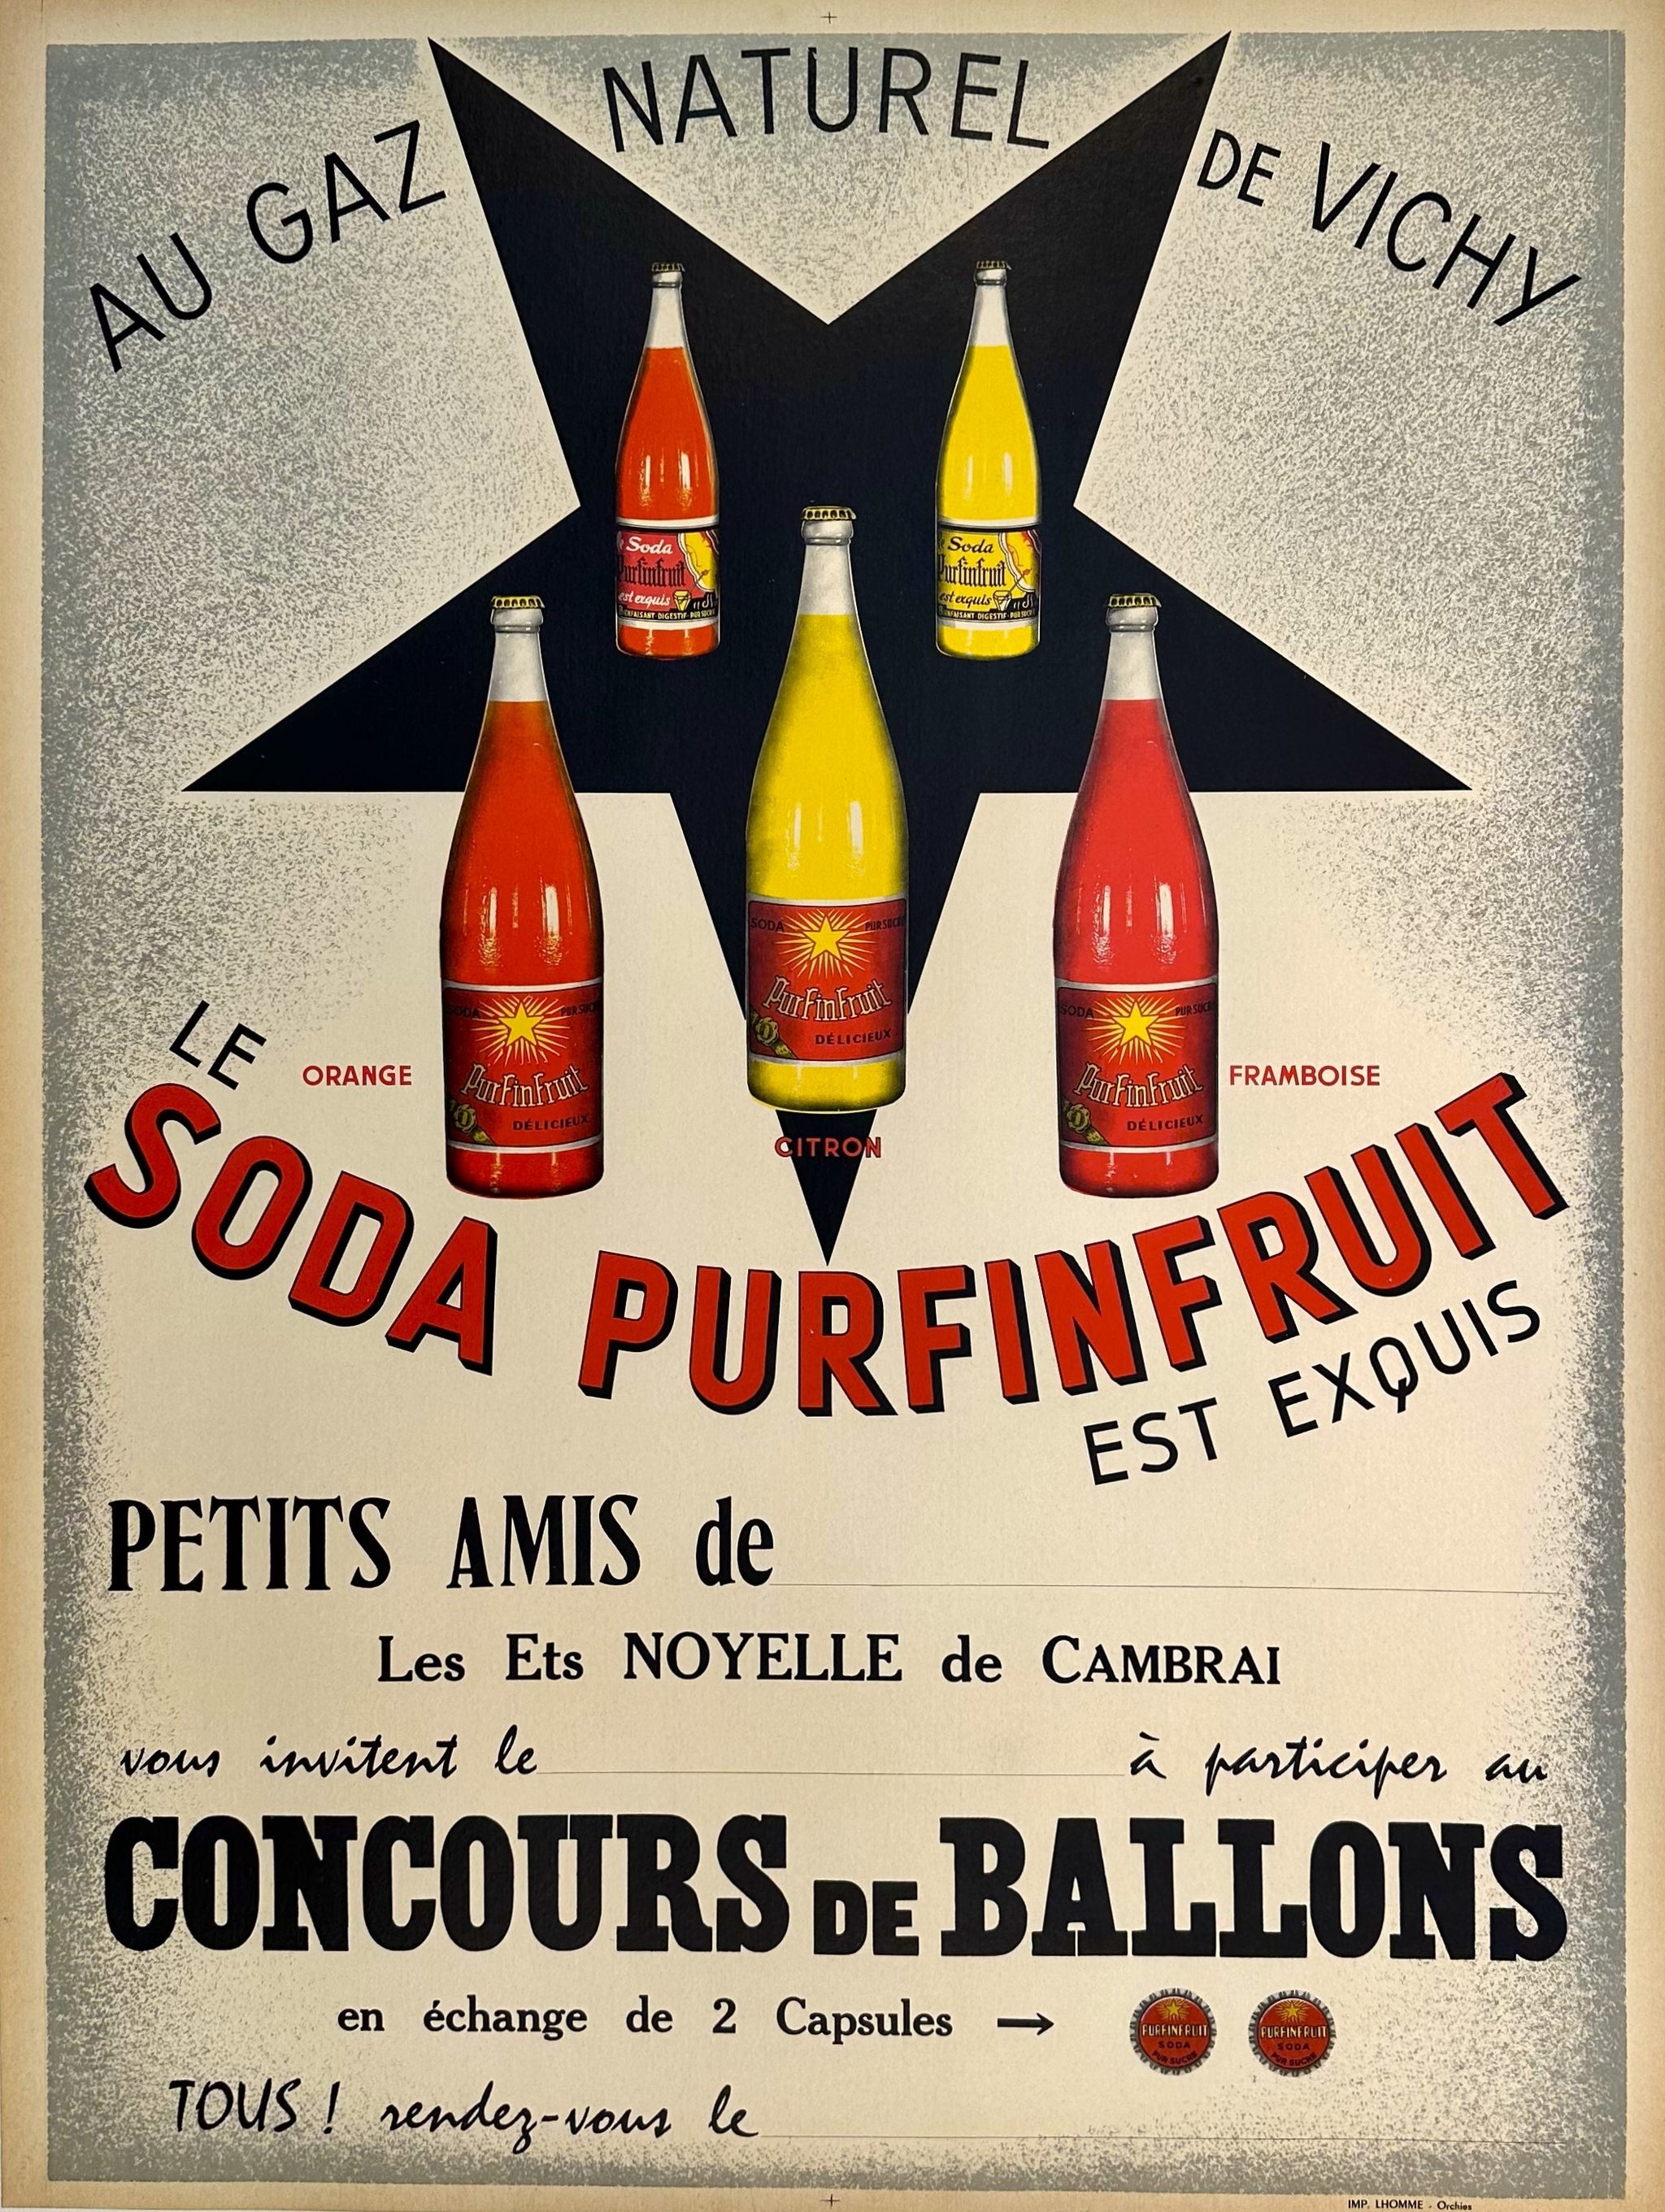 Authentic Vintage Poster | Soda Purfinfruit